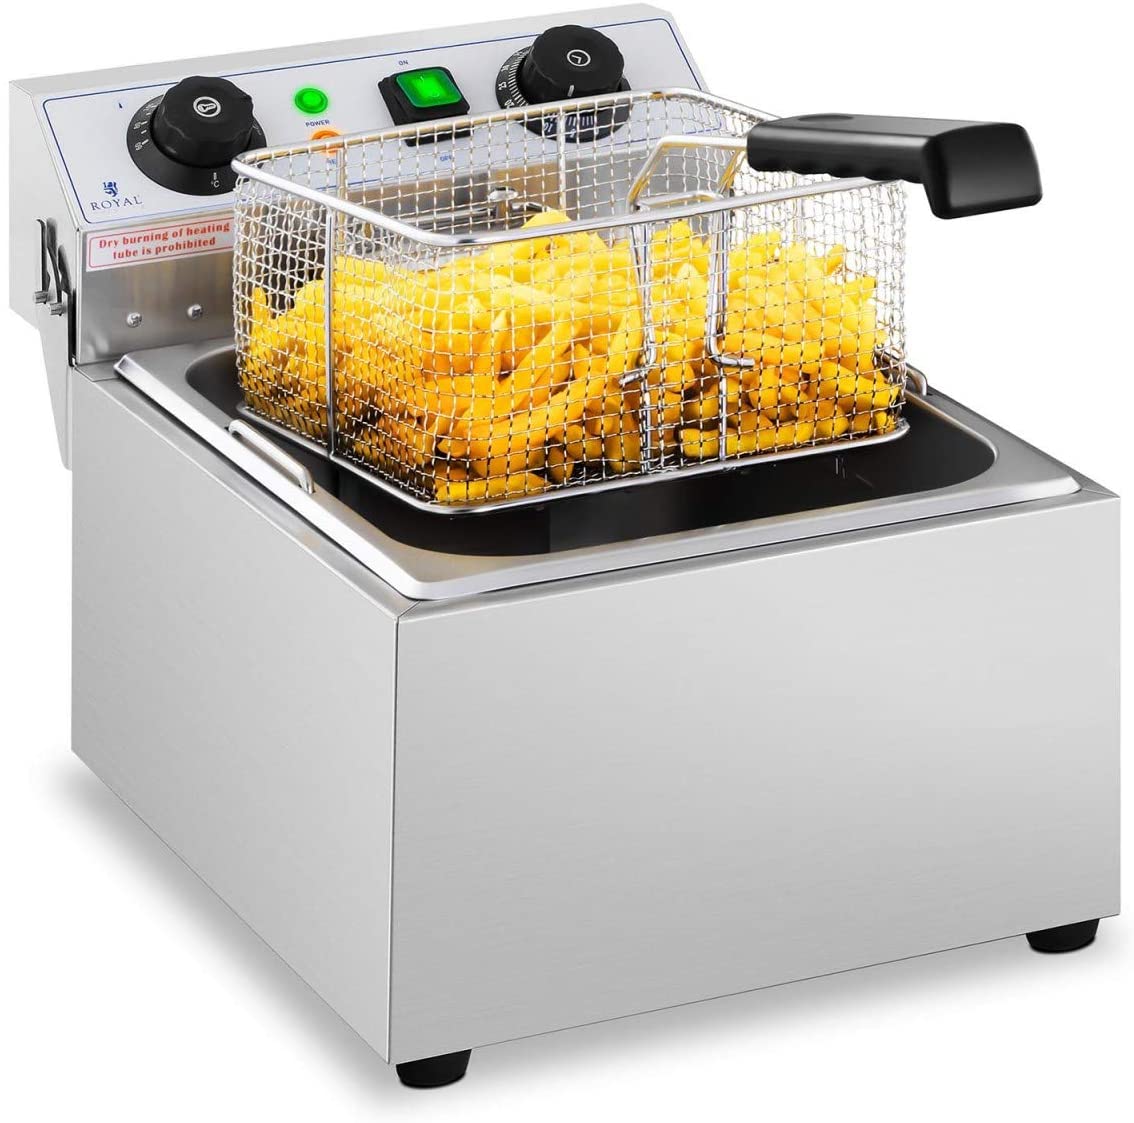 Royal Catering RCTF 10EB Stainless Steel Electric Fryer (3200 W, Capacity: 10 L, Temperature Range: 50-200 °C, Cold Zone, with Timer up to 60 min.)